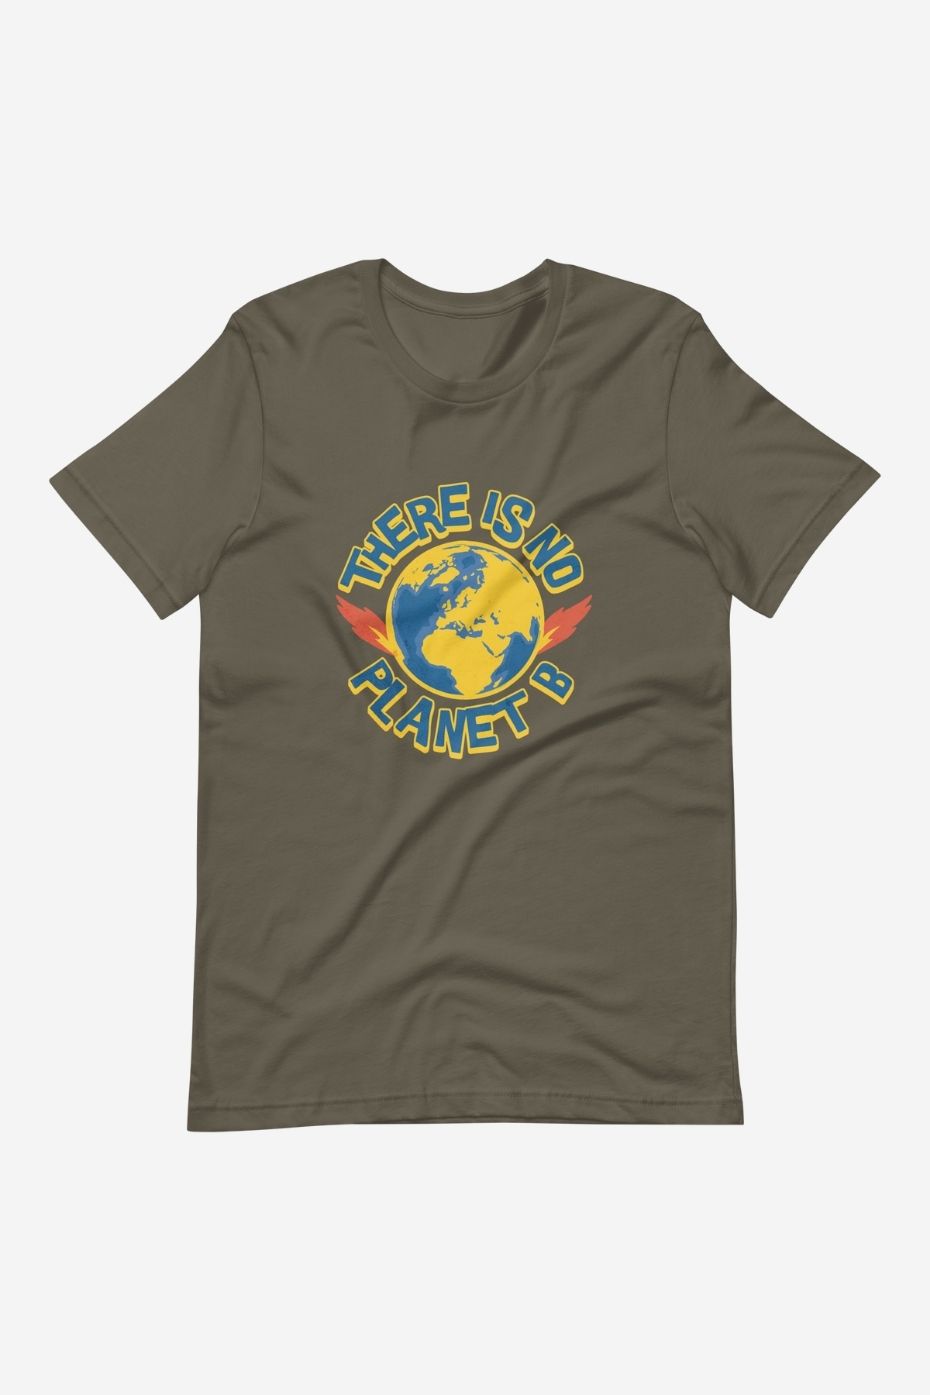 There is No Planet B - Unisex t-shirt